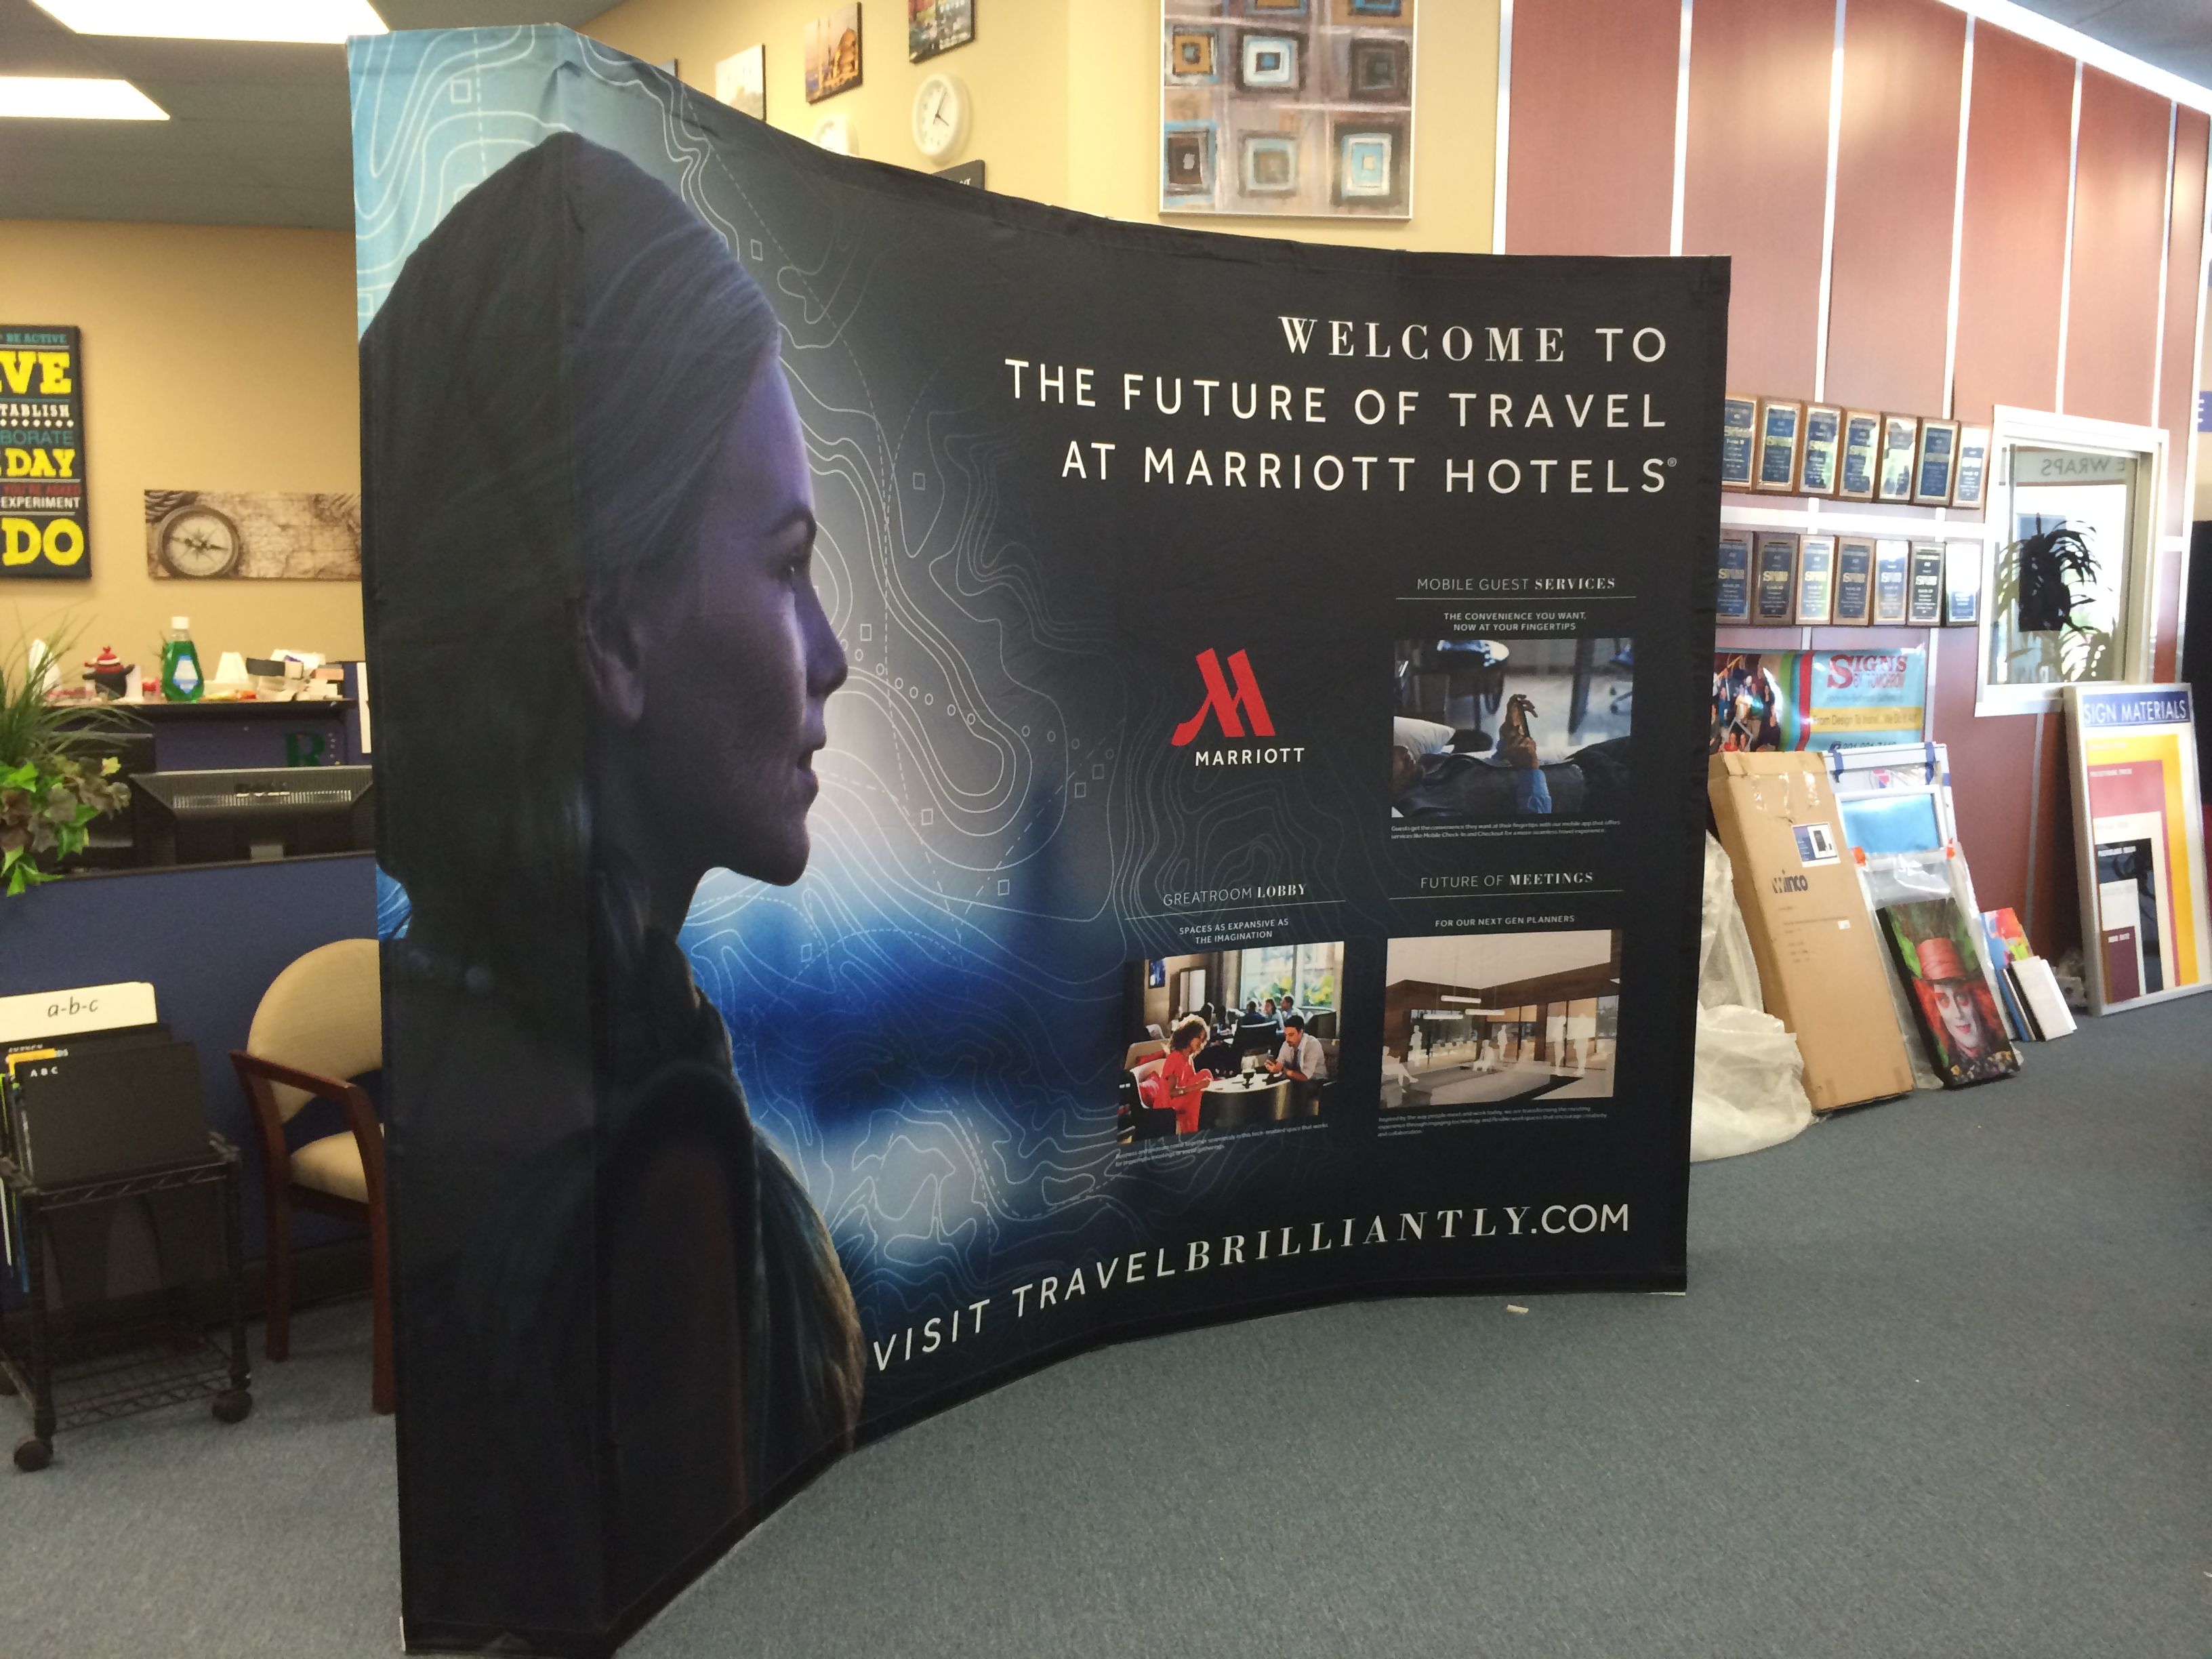 custom printed dye sublimated pop up banner stand